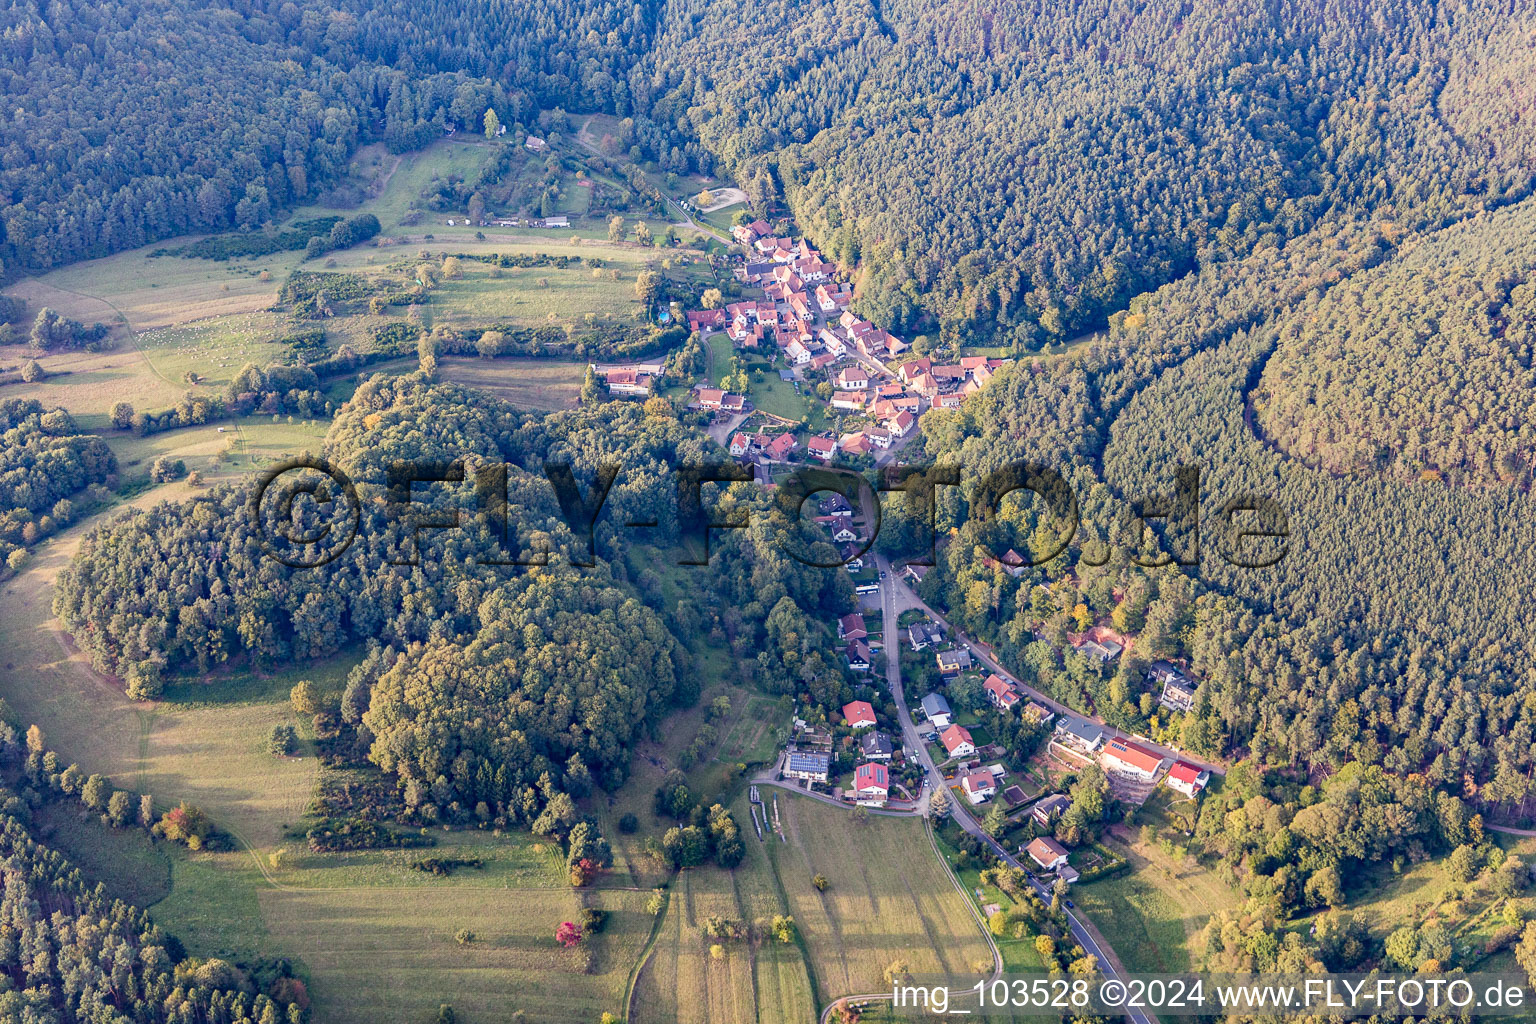 Blankenborn in the state Rhineland-Palatinate, Germany seen from a drone